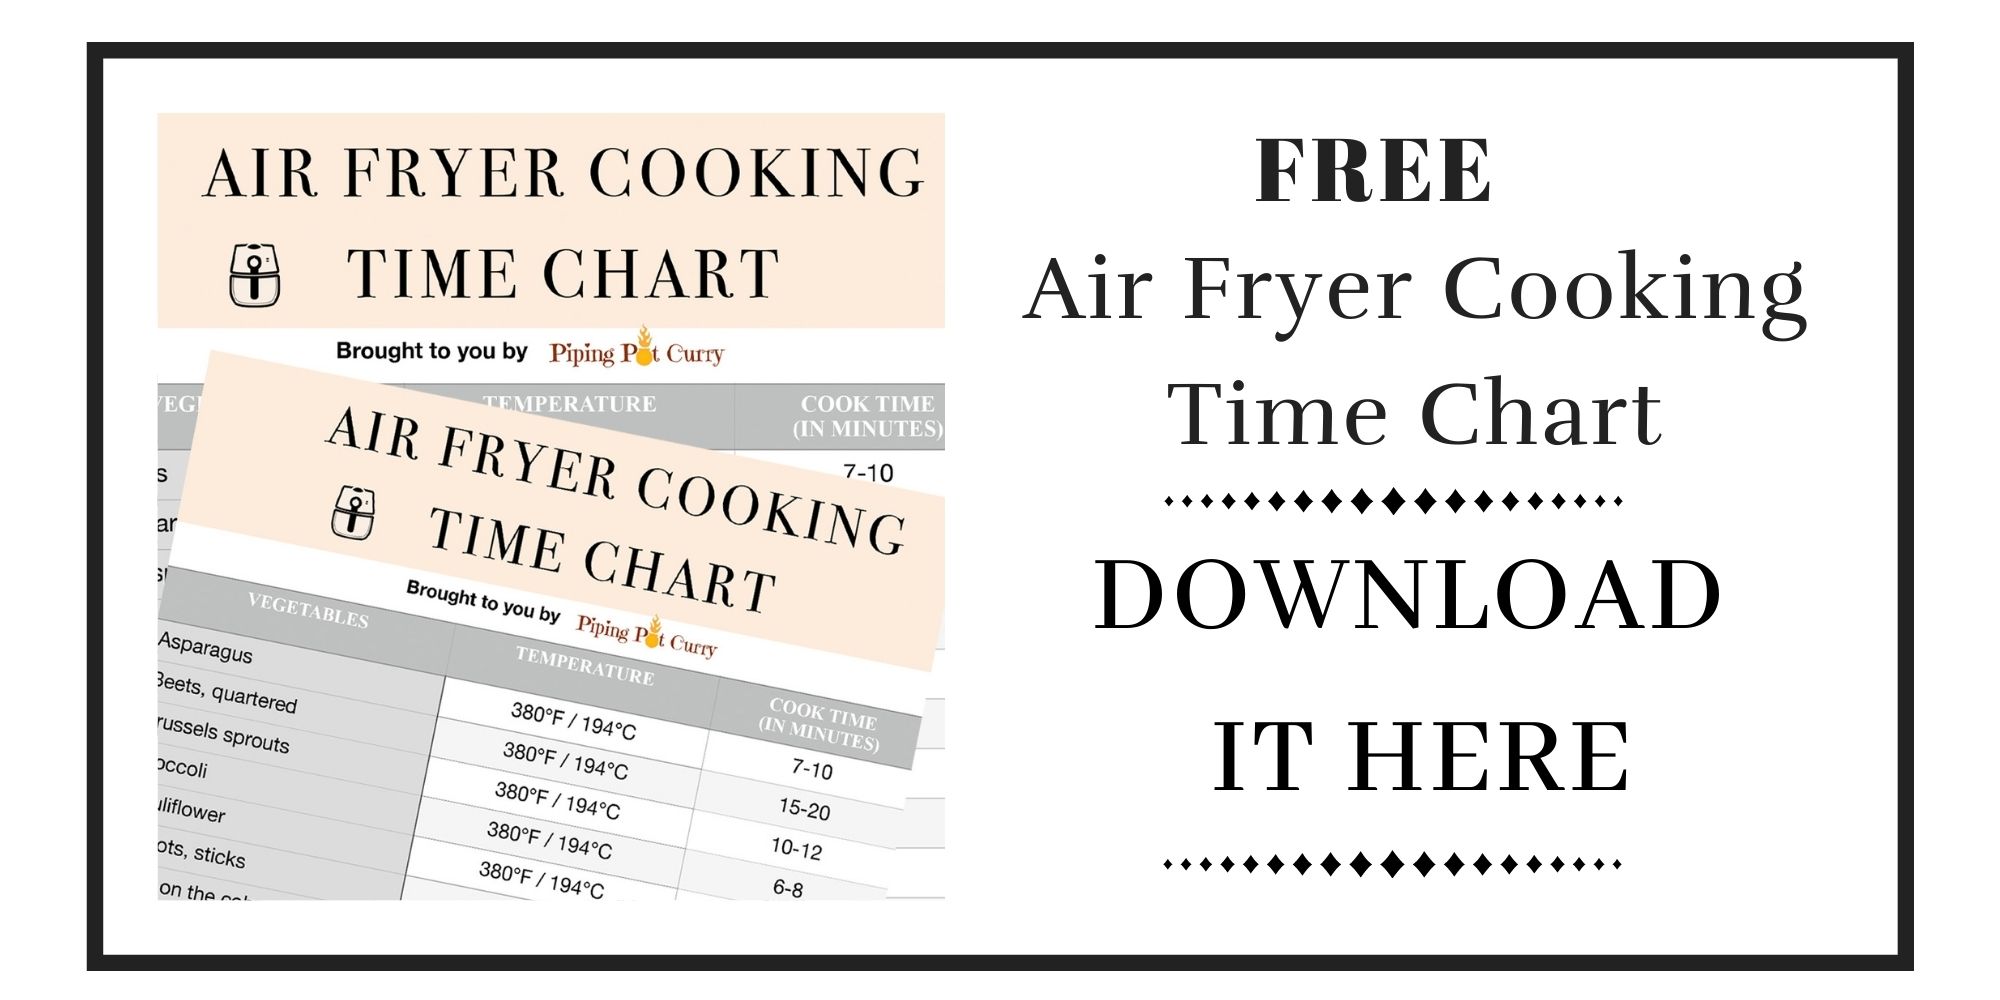 https://pipingpotcurry.com/wp-content/uploads/2021/01/Free-Air-Fryer-Cooking-Time-Chart-DOWNLOAD.jpg